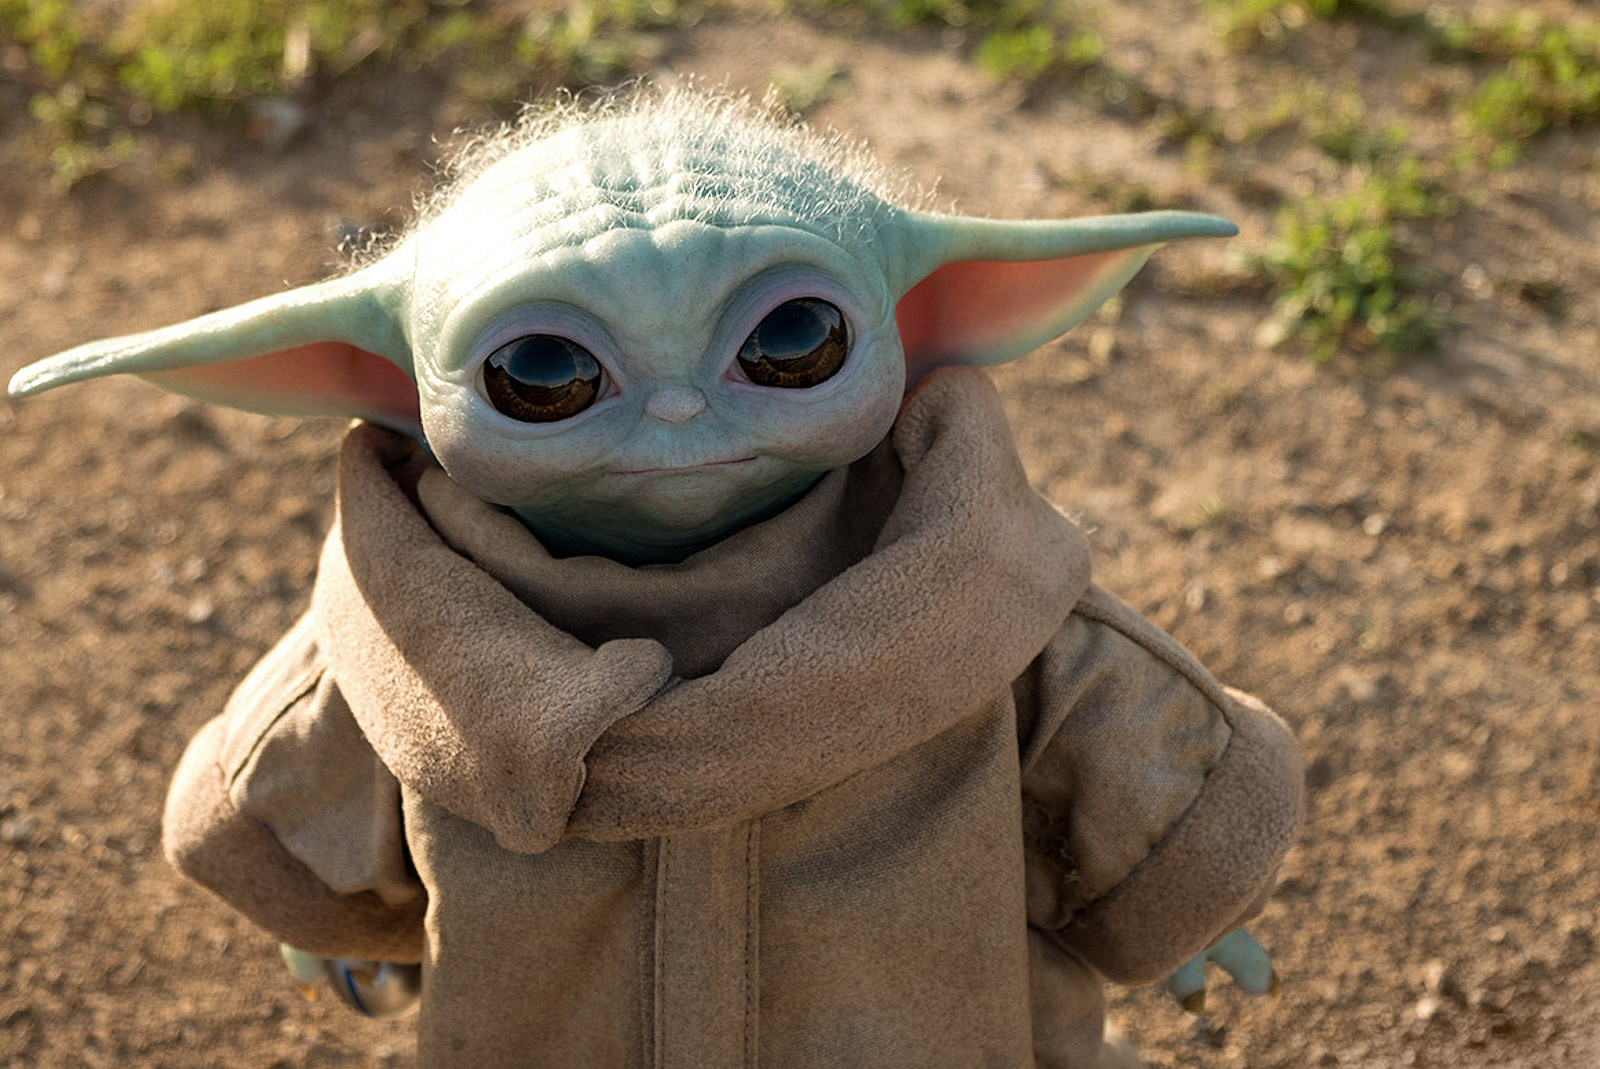 This Life-Size Baby Yoda Toy Will Melt Your Heart